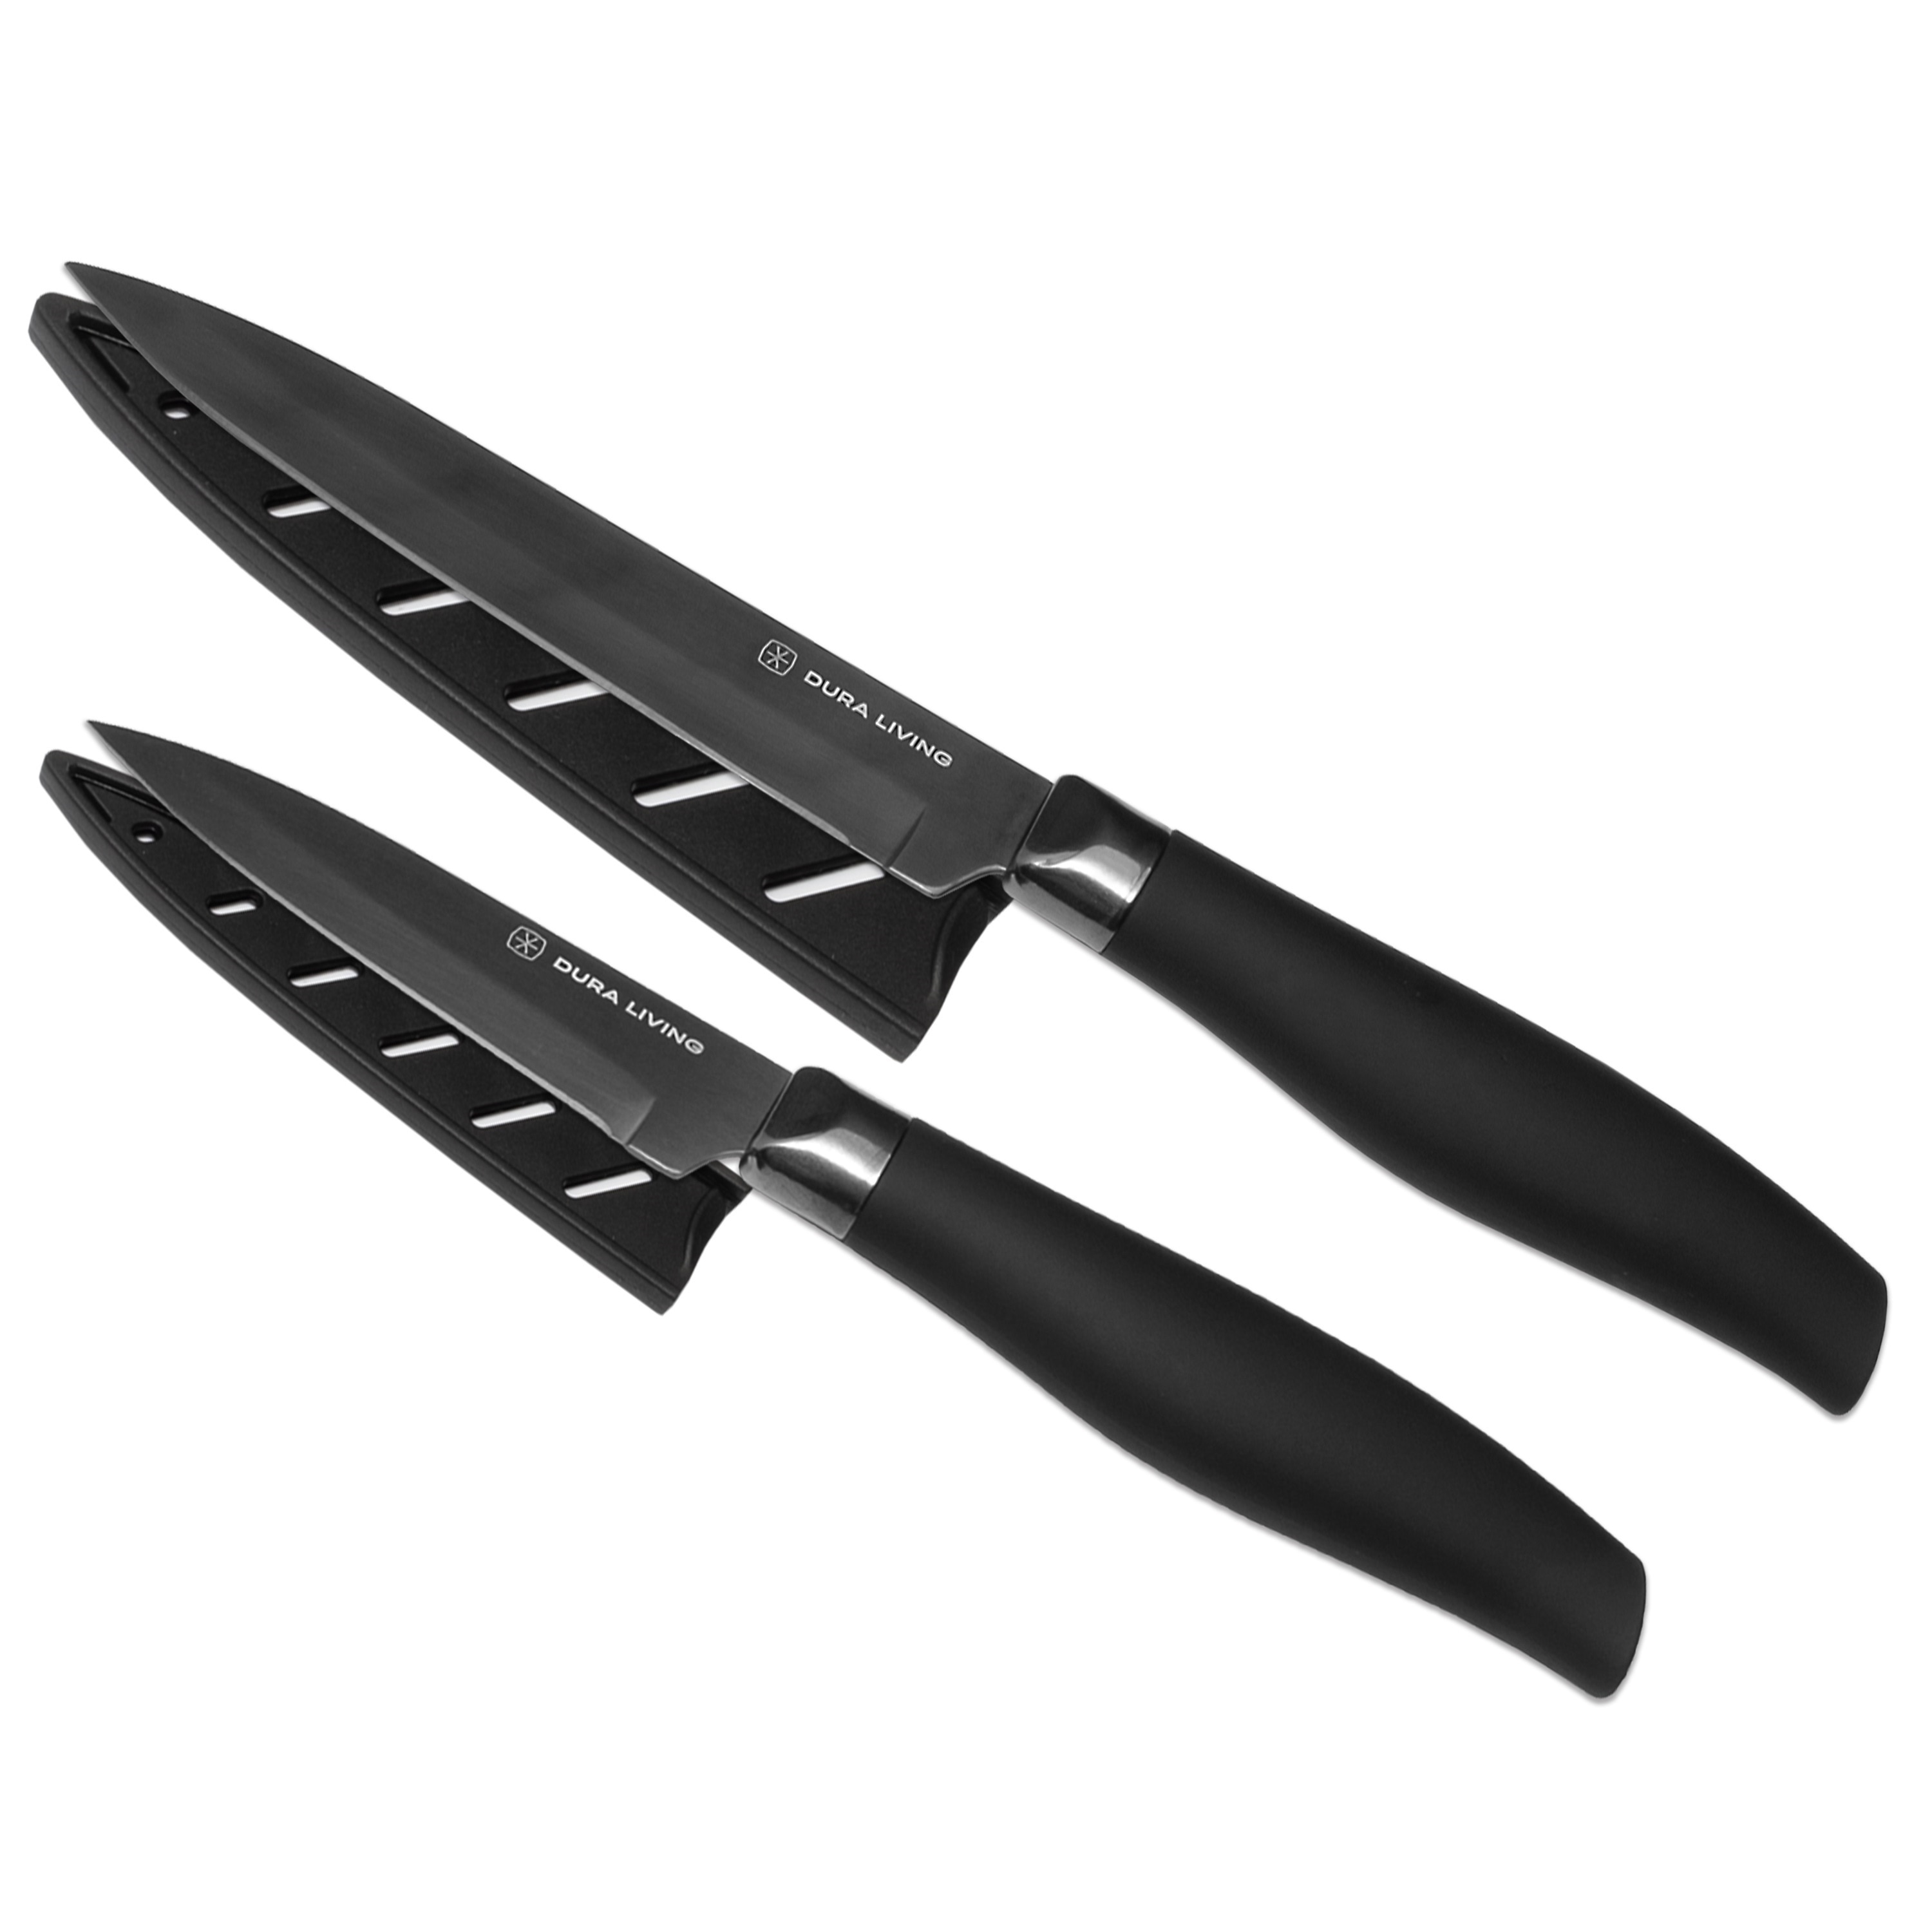 https://ak1.ostkcdn.com/images/products/is/images/direct/46aad8d7e795b65c6771574a66077df5a155e2f1/Dura-Living-2-Piece-Kitchen-Knife-Set---Nonstick-Titanium-Plated-Stainless-Steel-Cooking-Knives-With-Matching-Blade-Guards.jpg